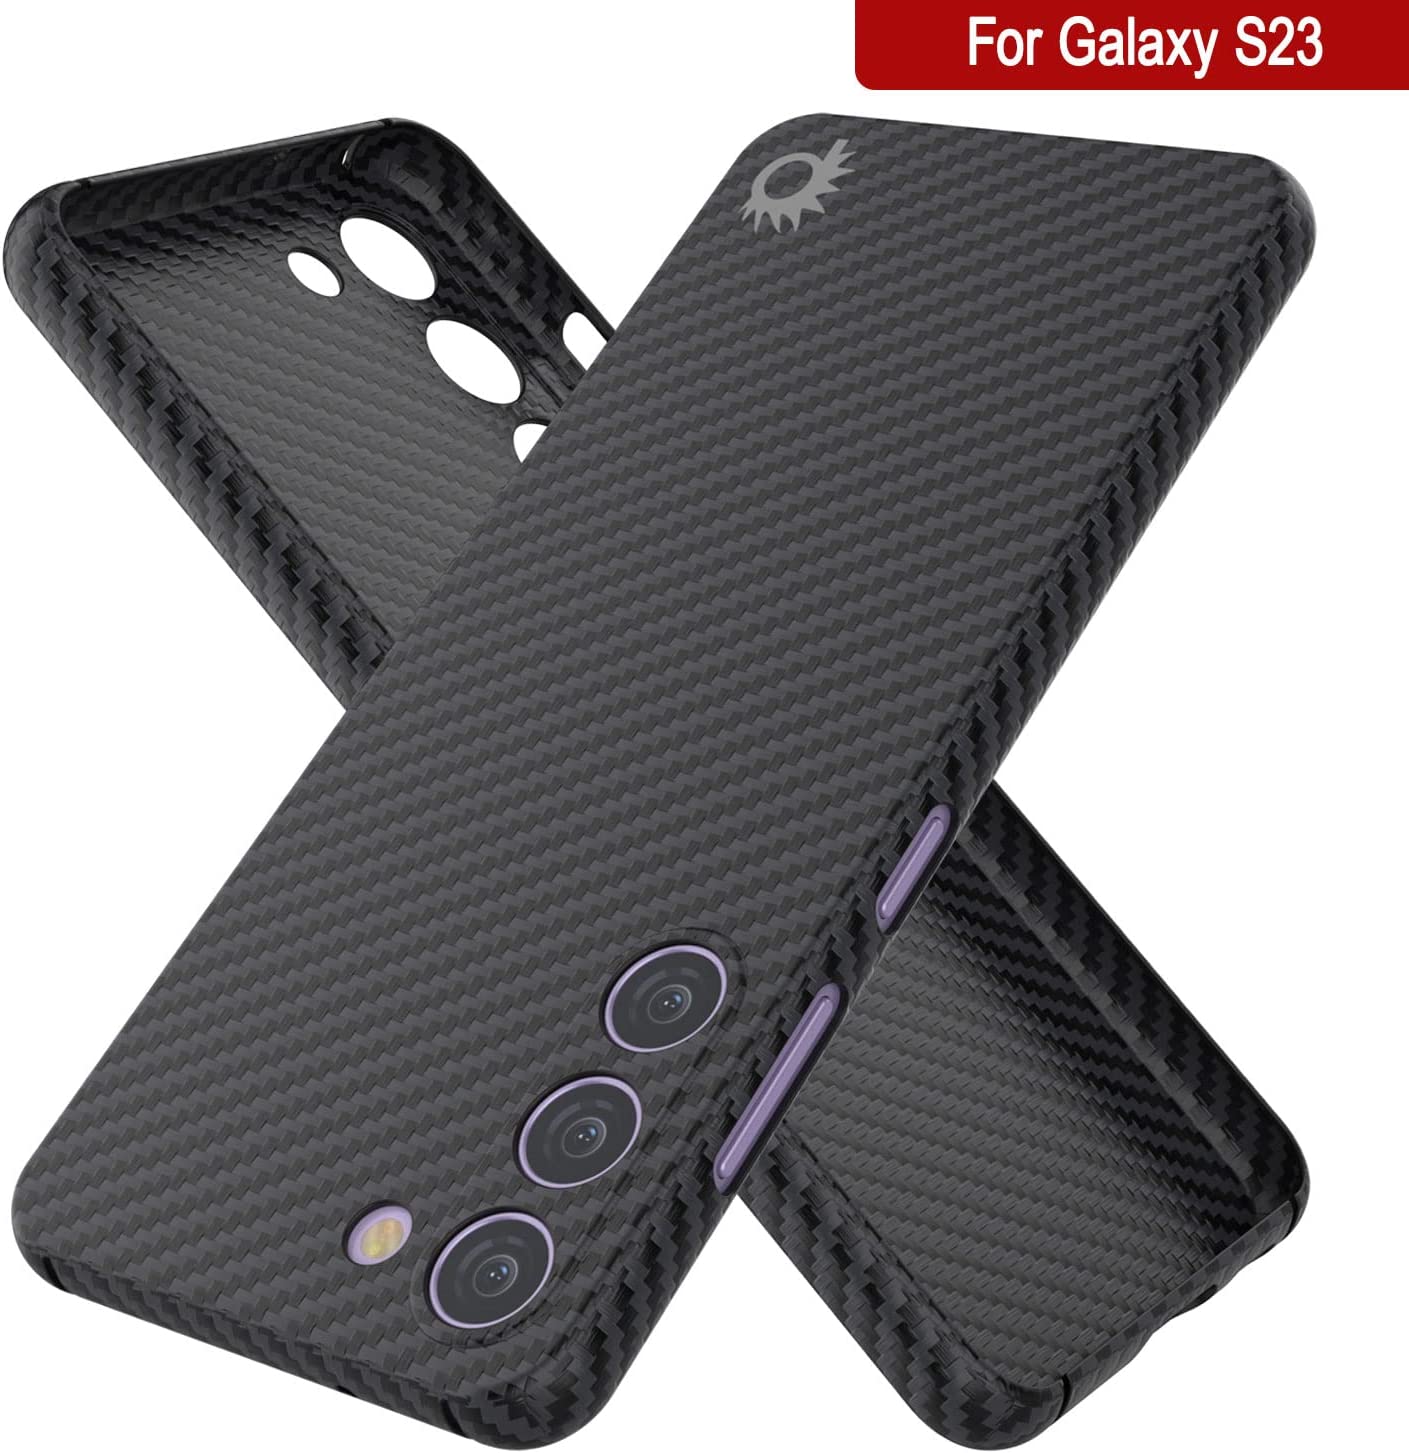 For Samsung Galaxy S23 Ultra 5G Carbon Fiber Case For SamsungS23